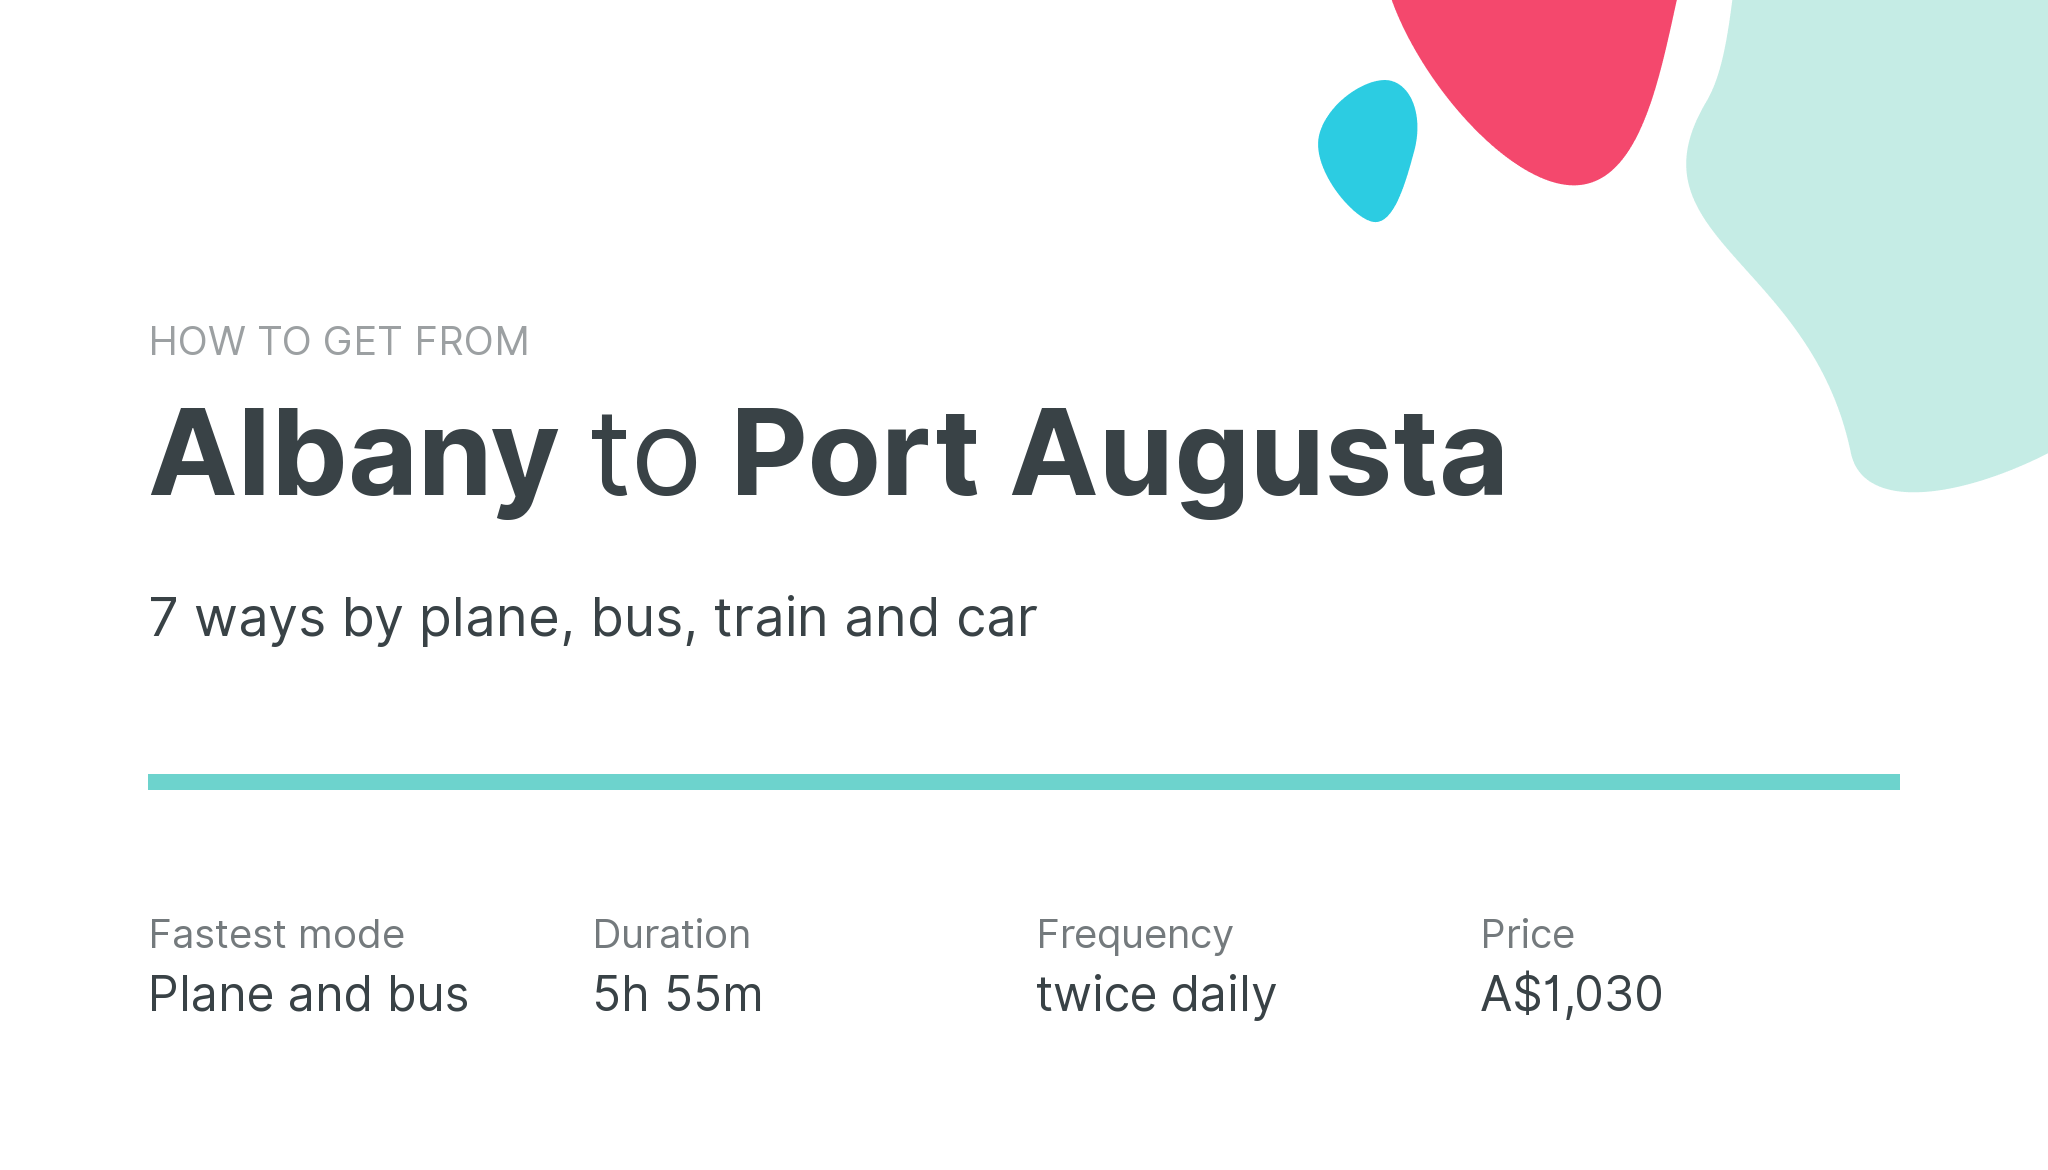 How do I get from Albany to Port Augusta